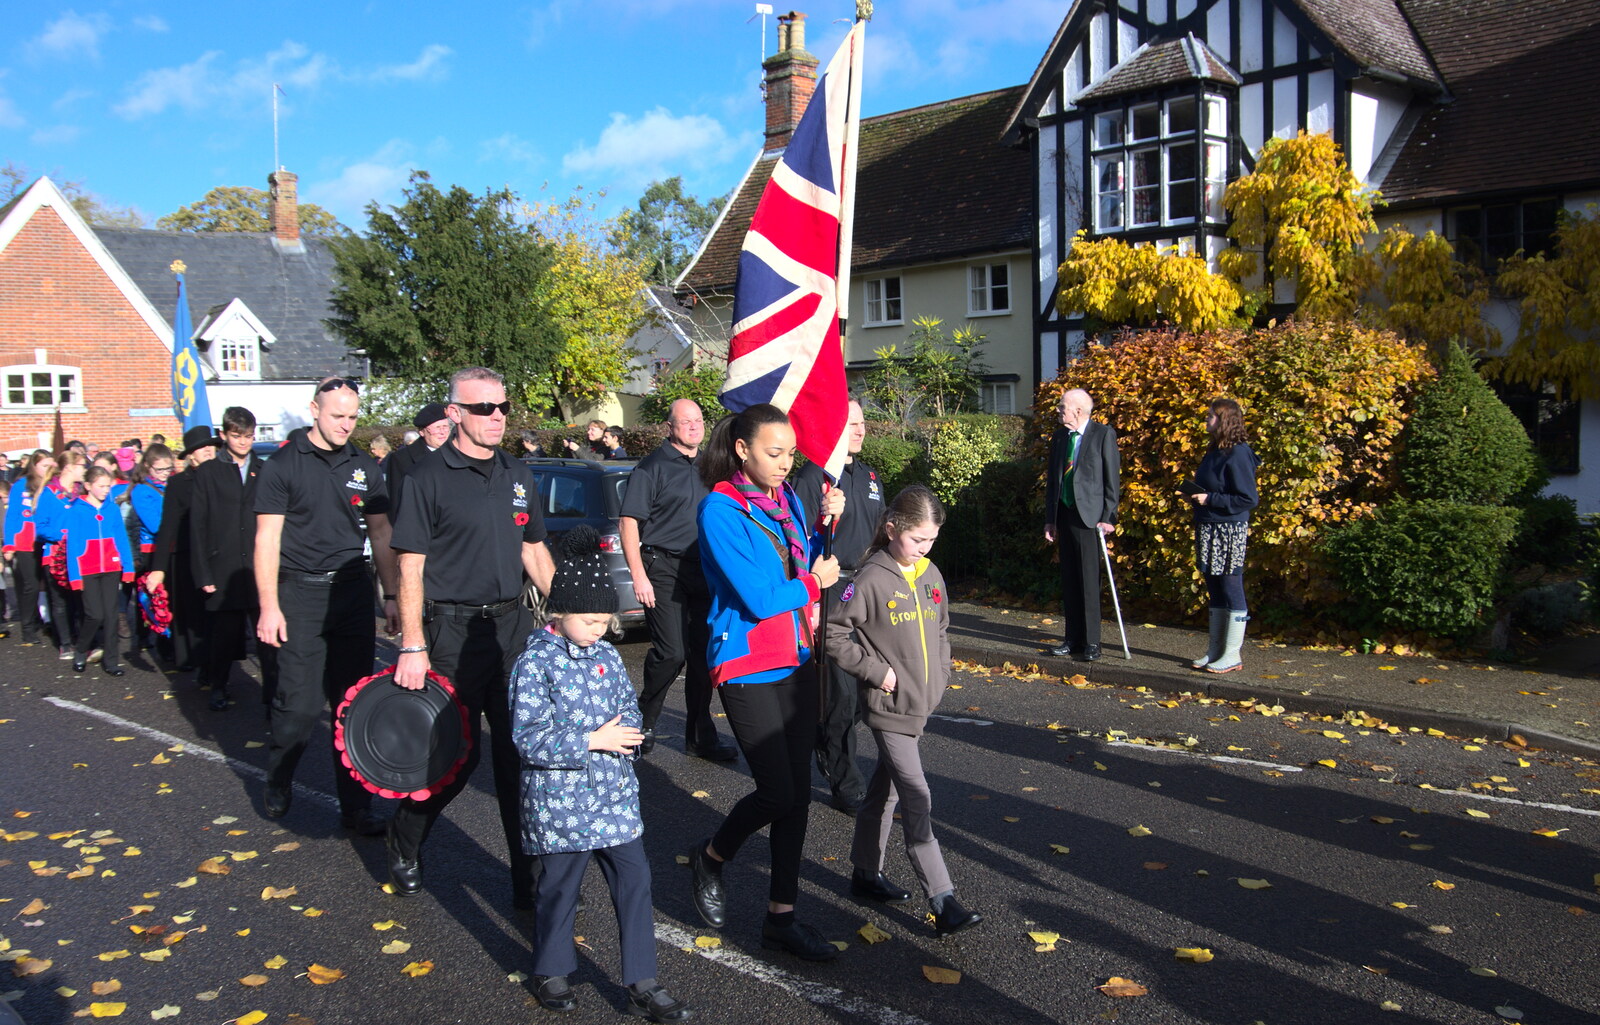 The march heads off up the road from The Remembrance Sunday Parade, Eye, Suffolk - 11th November 2018